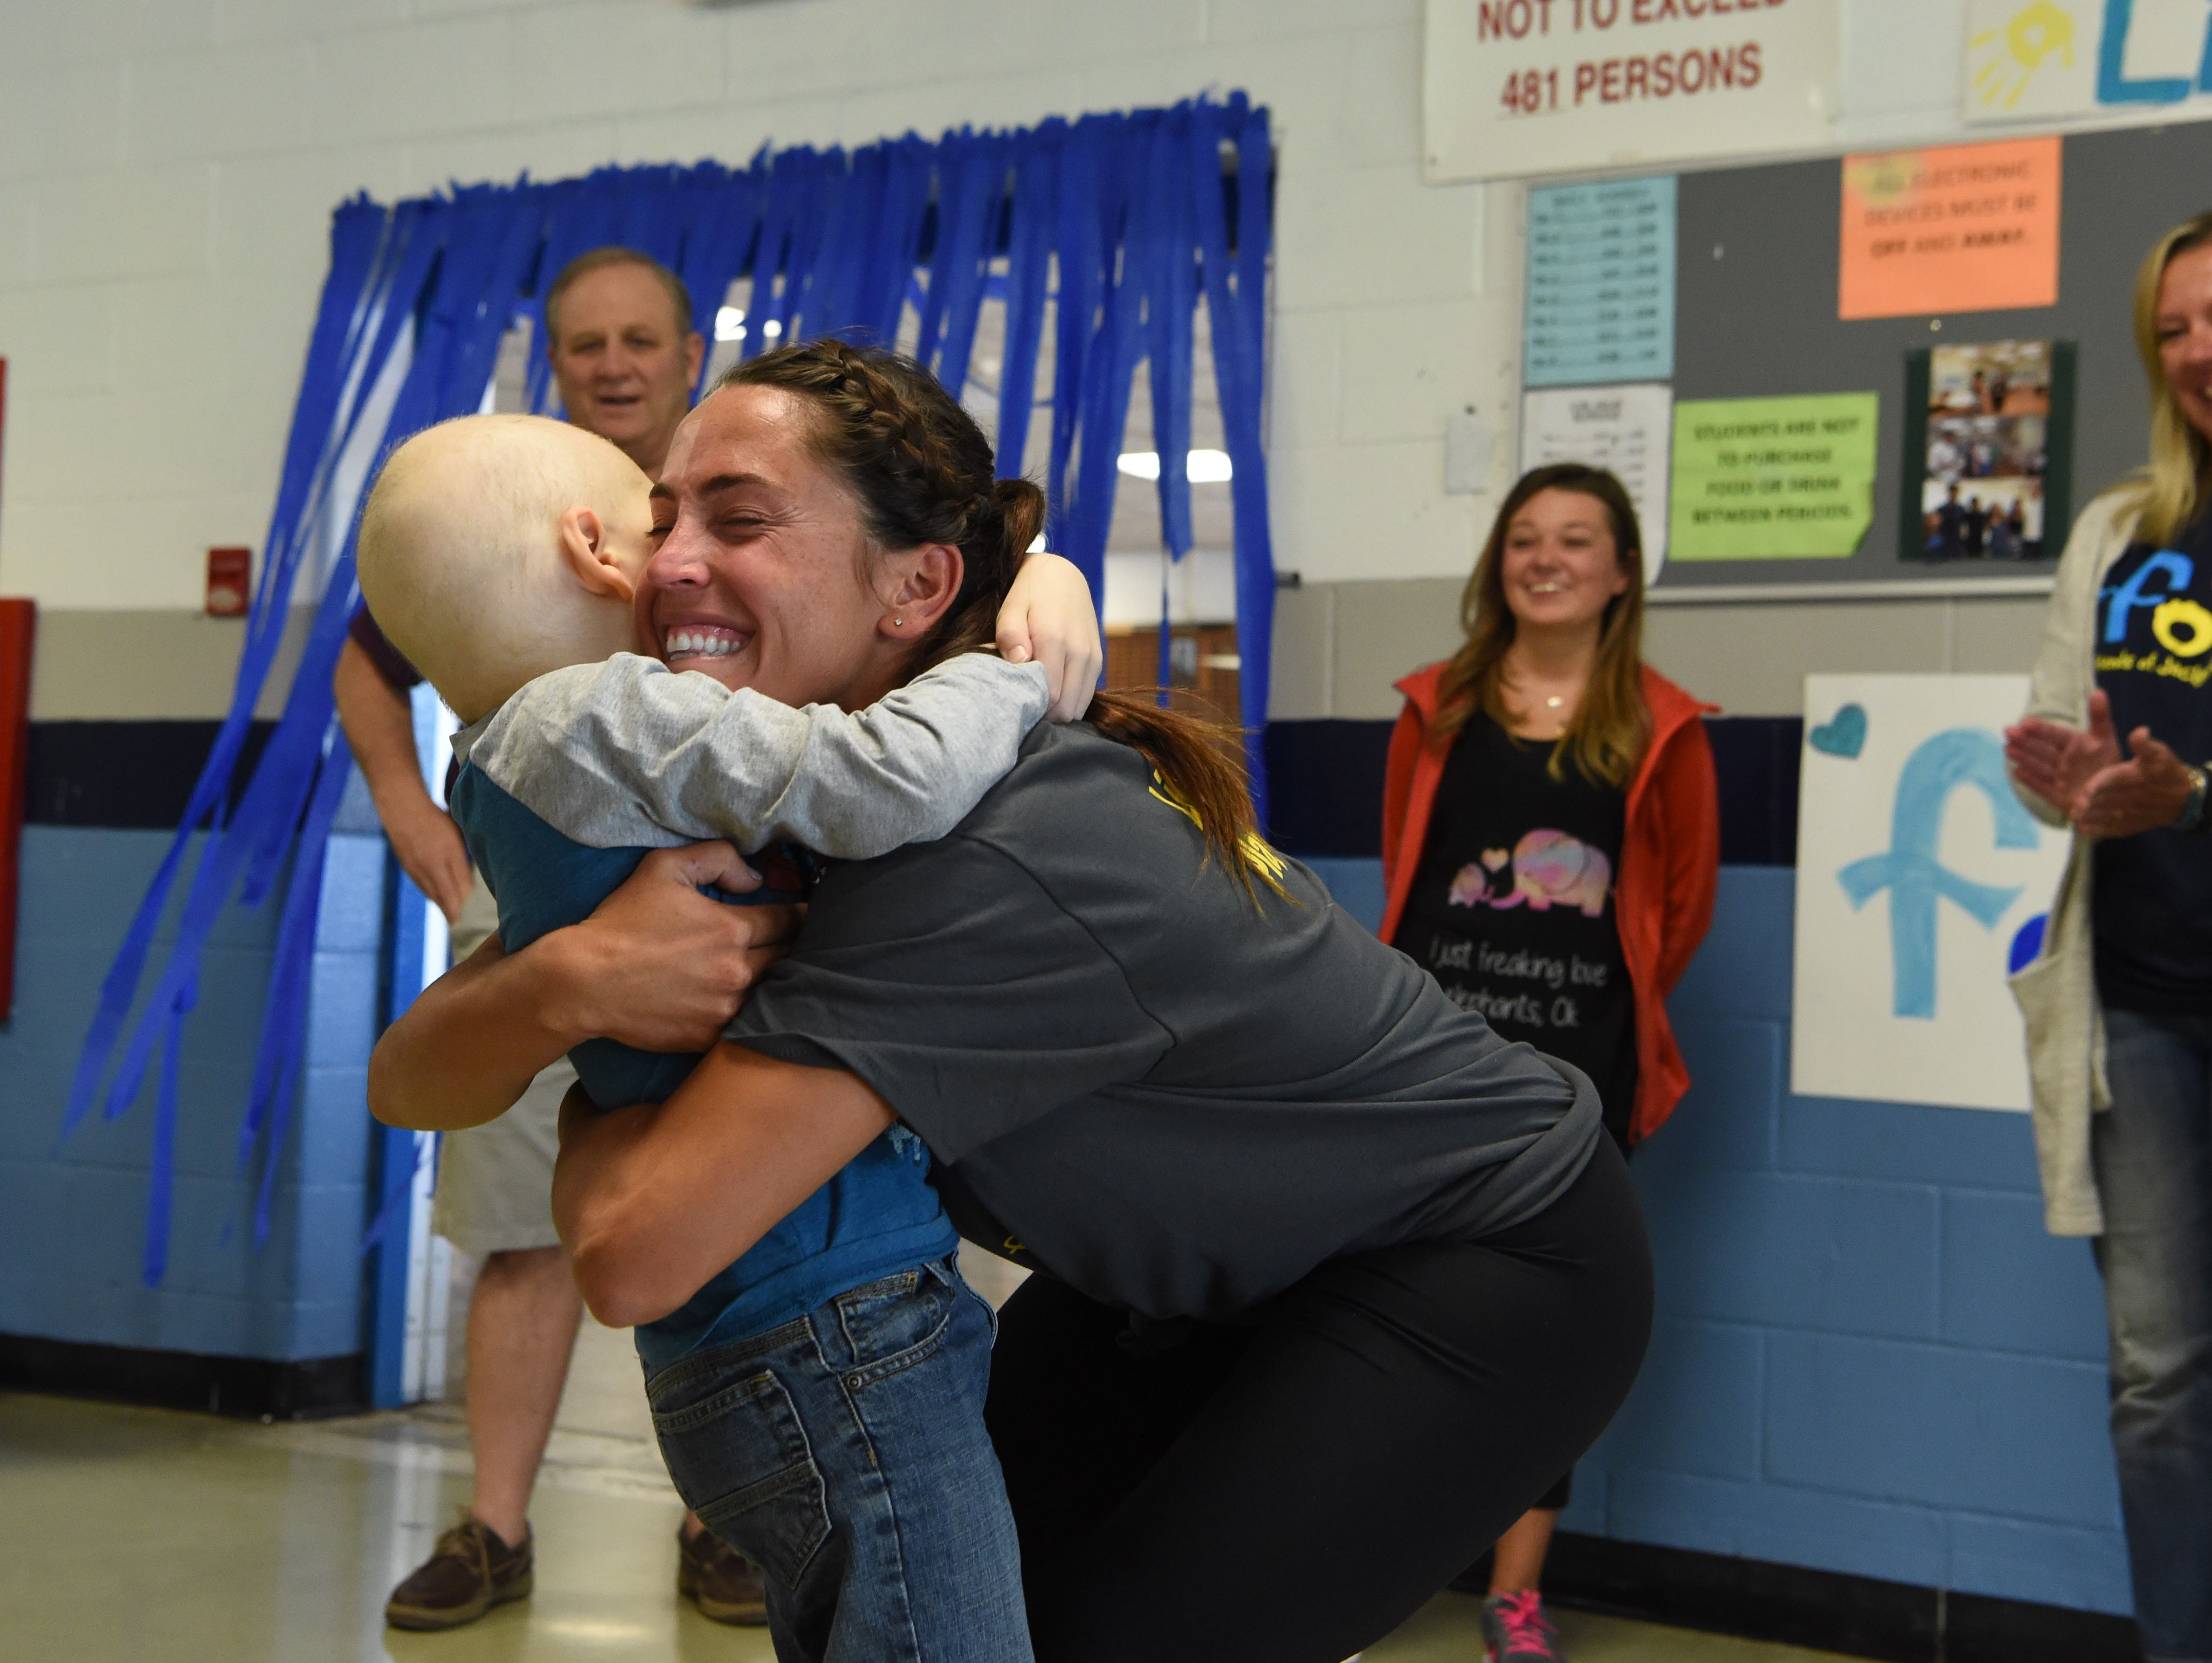 Kristen Perry, right, a physical education teacher and the field hockey coach at John Jay High School, gives a hug to Liam Craane, 5, who is battling pediatric cancer. The school's field hockey team "adopted" Liam through the Friends of Jaclyn Foundation.